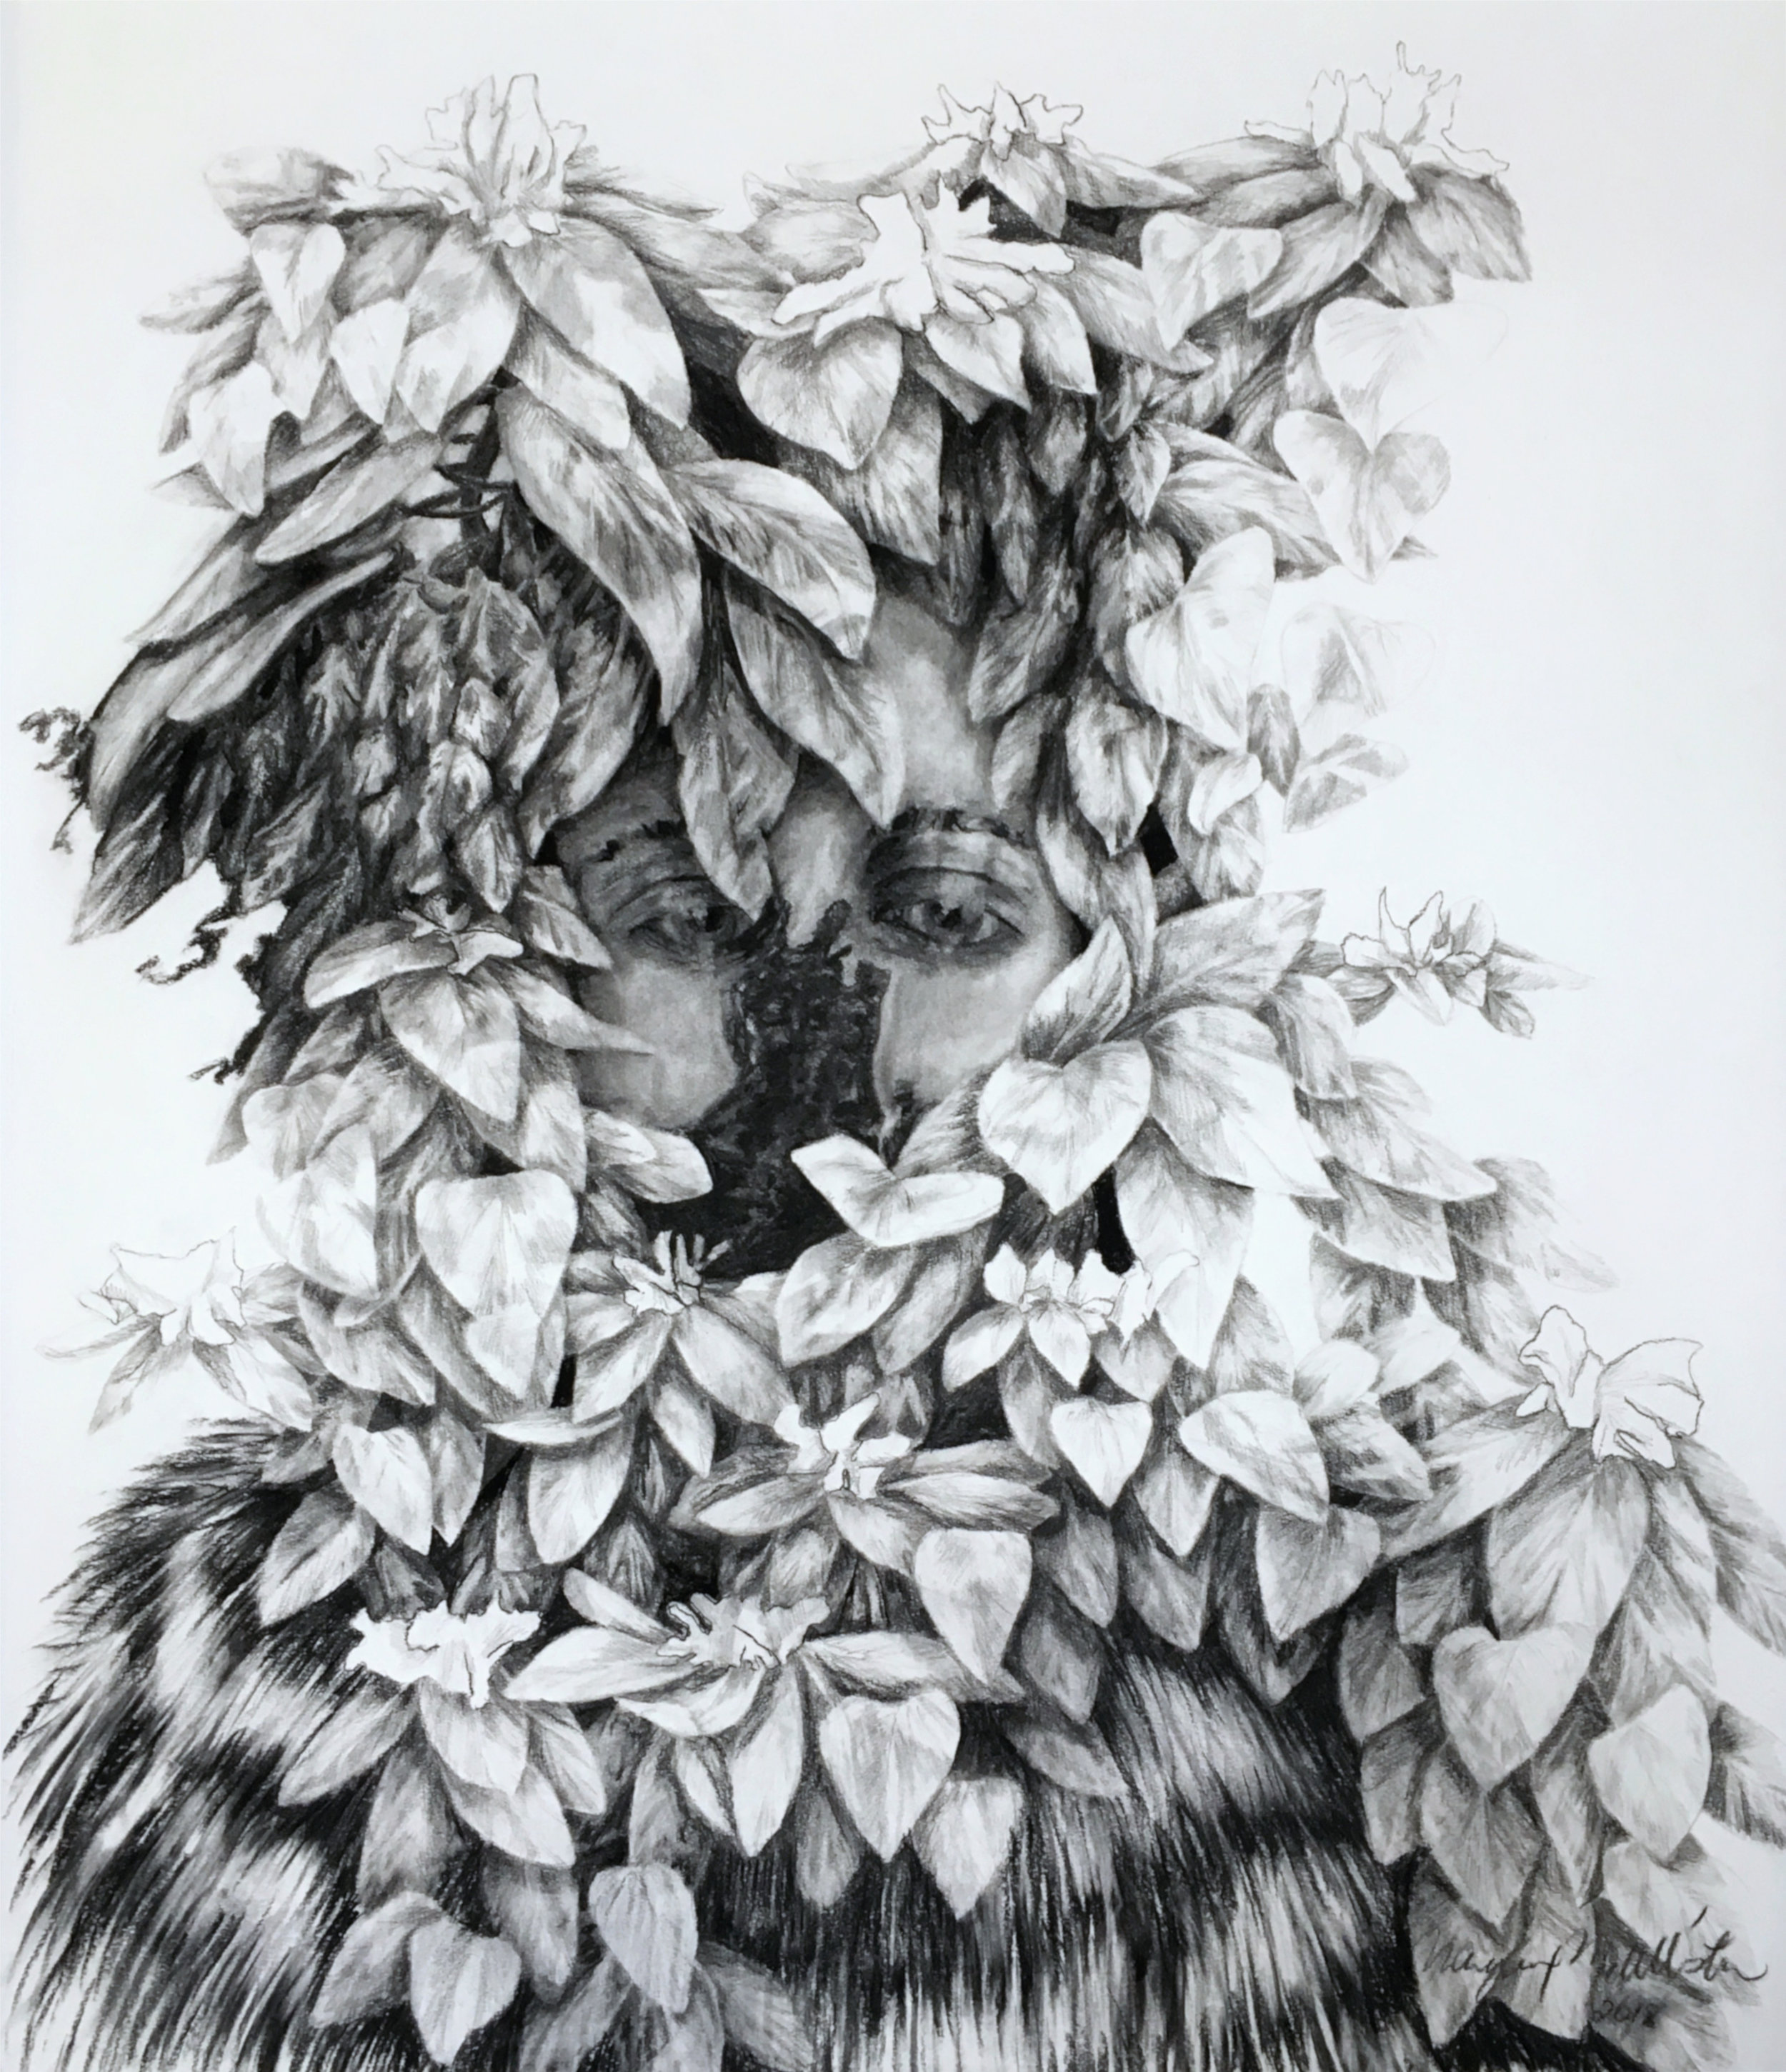   Hide , charcoal and pencil on paper, 36” x 42”, 2018. 